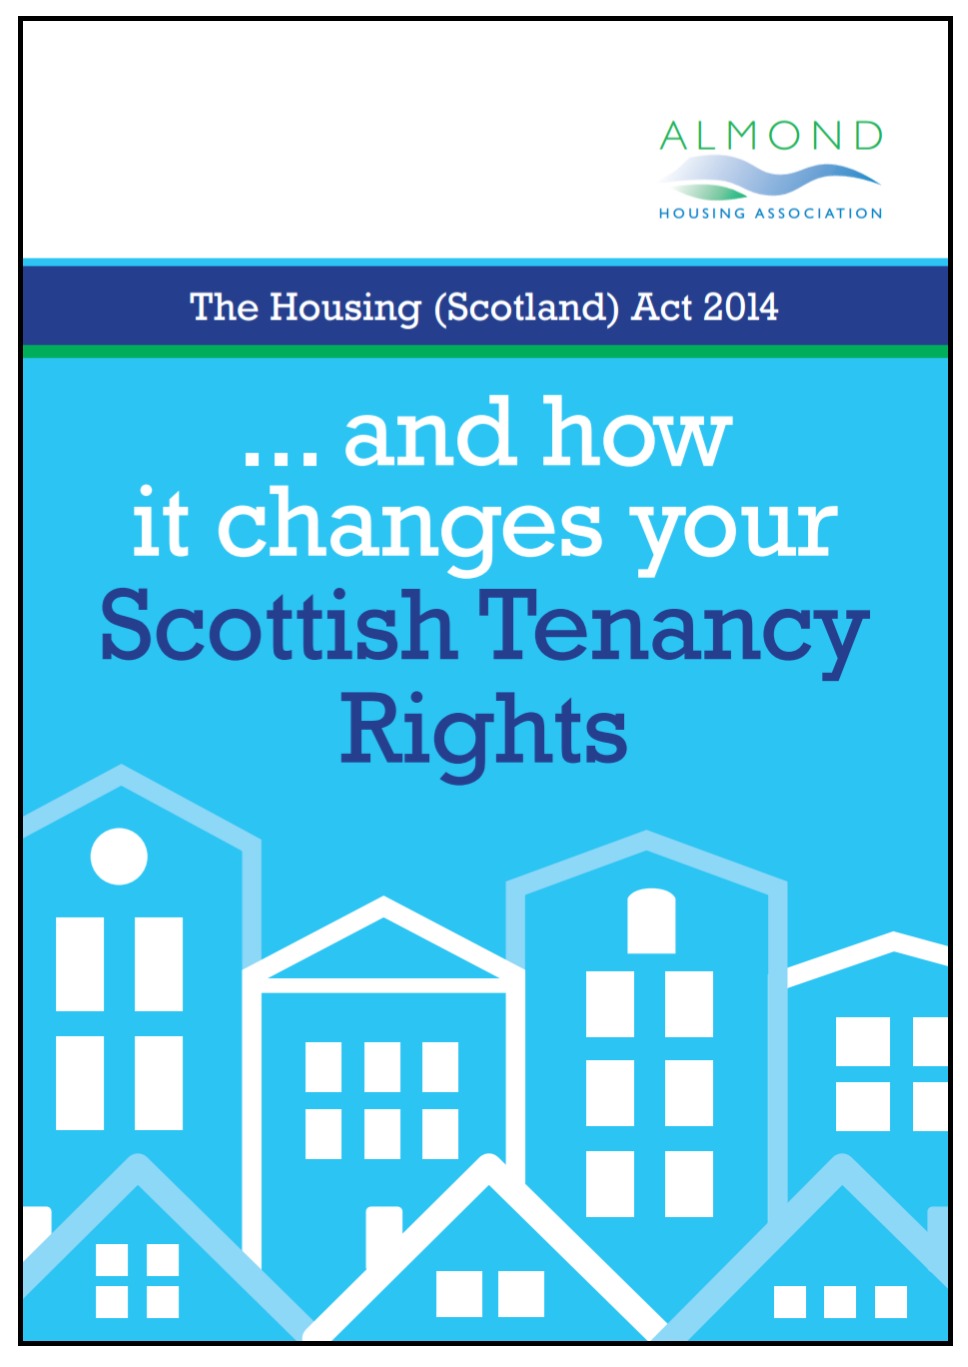 Housing (Scotland) Act 2014 leaflet cover